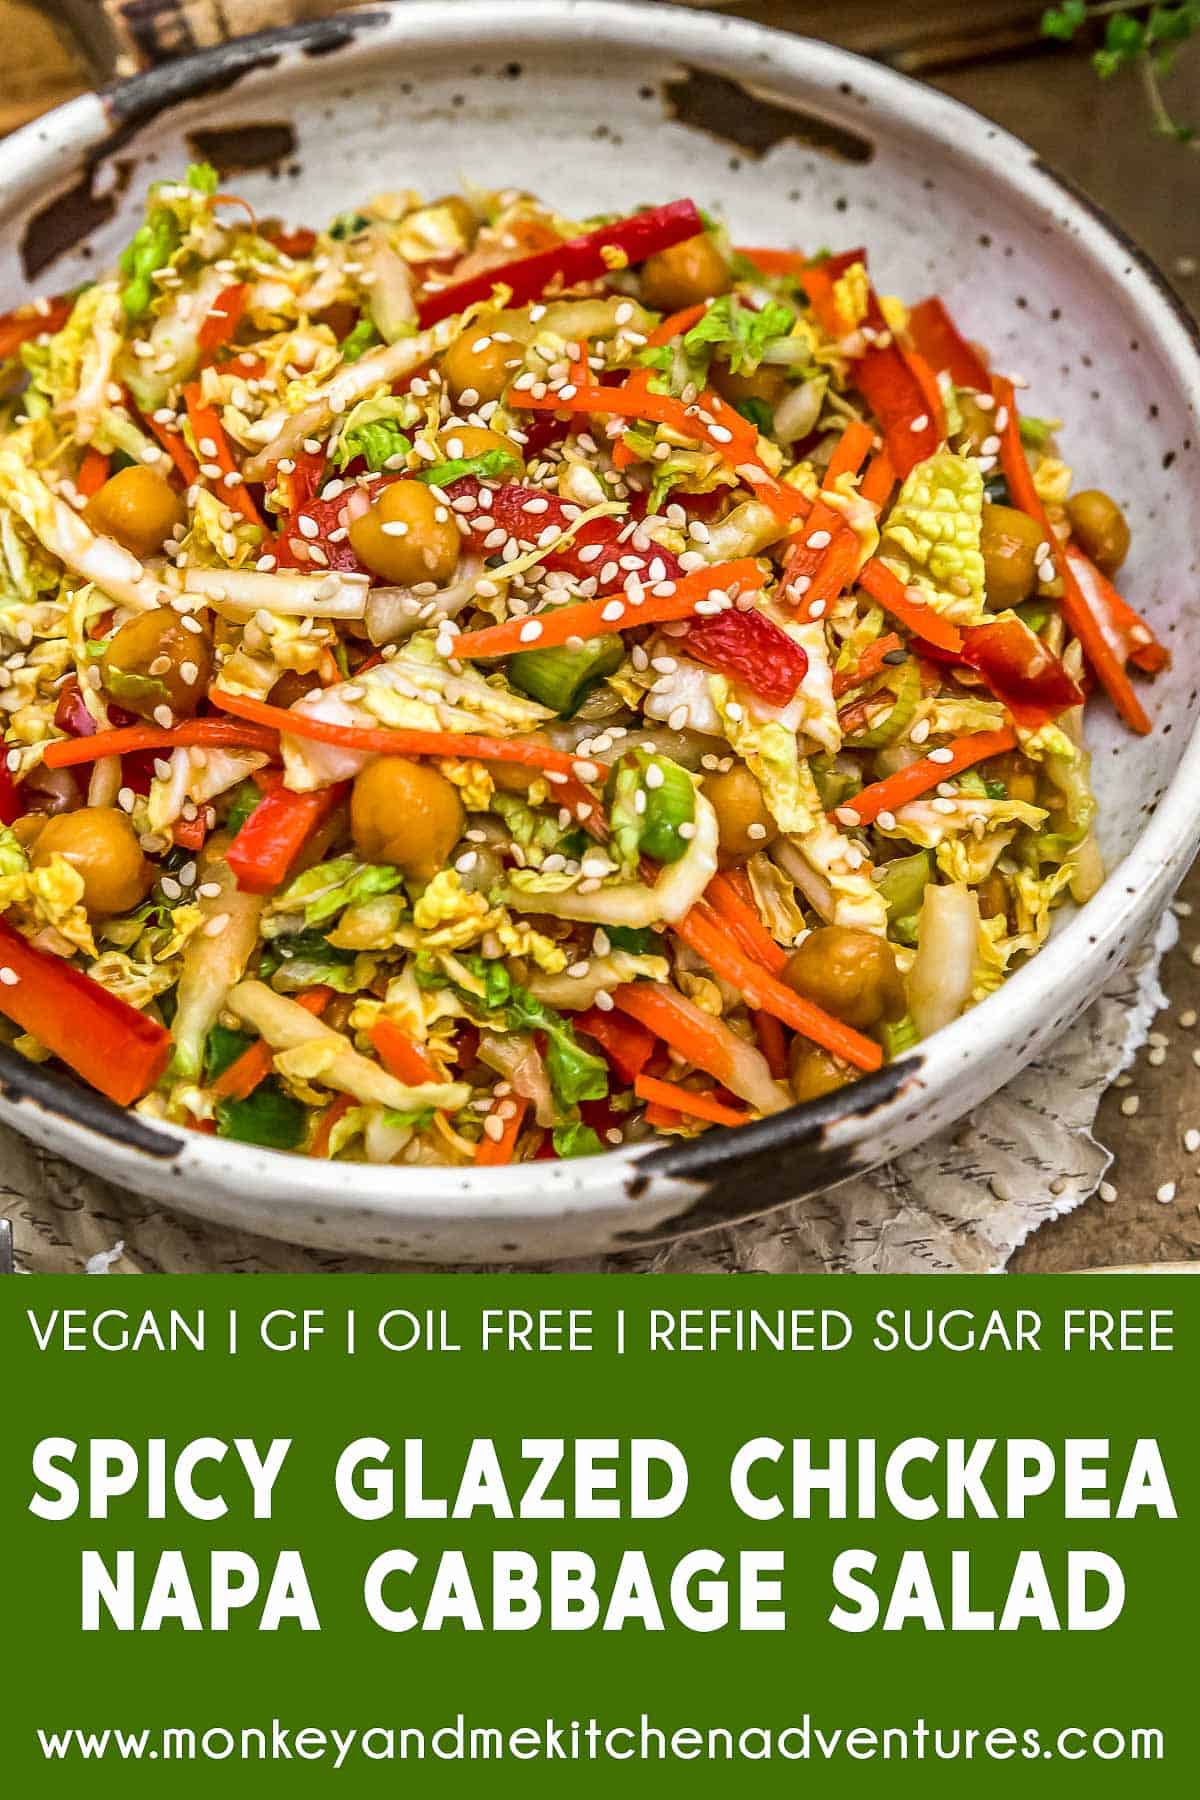 Spicy Glazed Chickpea Napa Cabbage Salad with text description